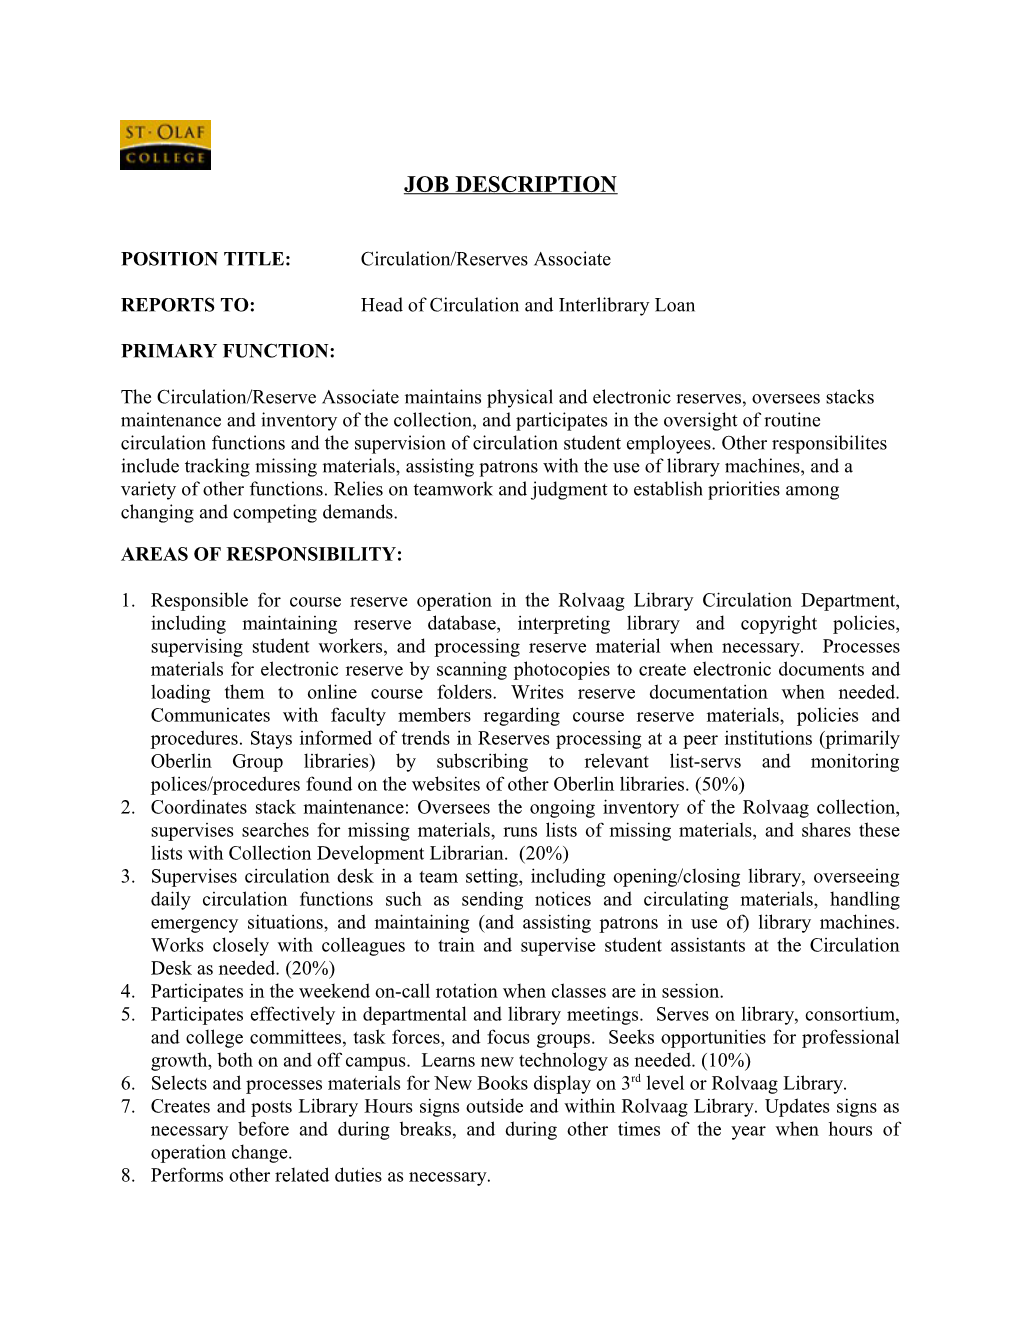 Instructions for Writing the Job Description s2